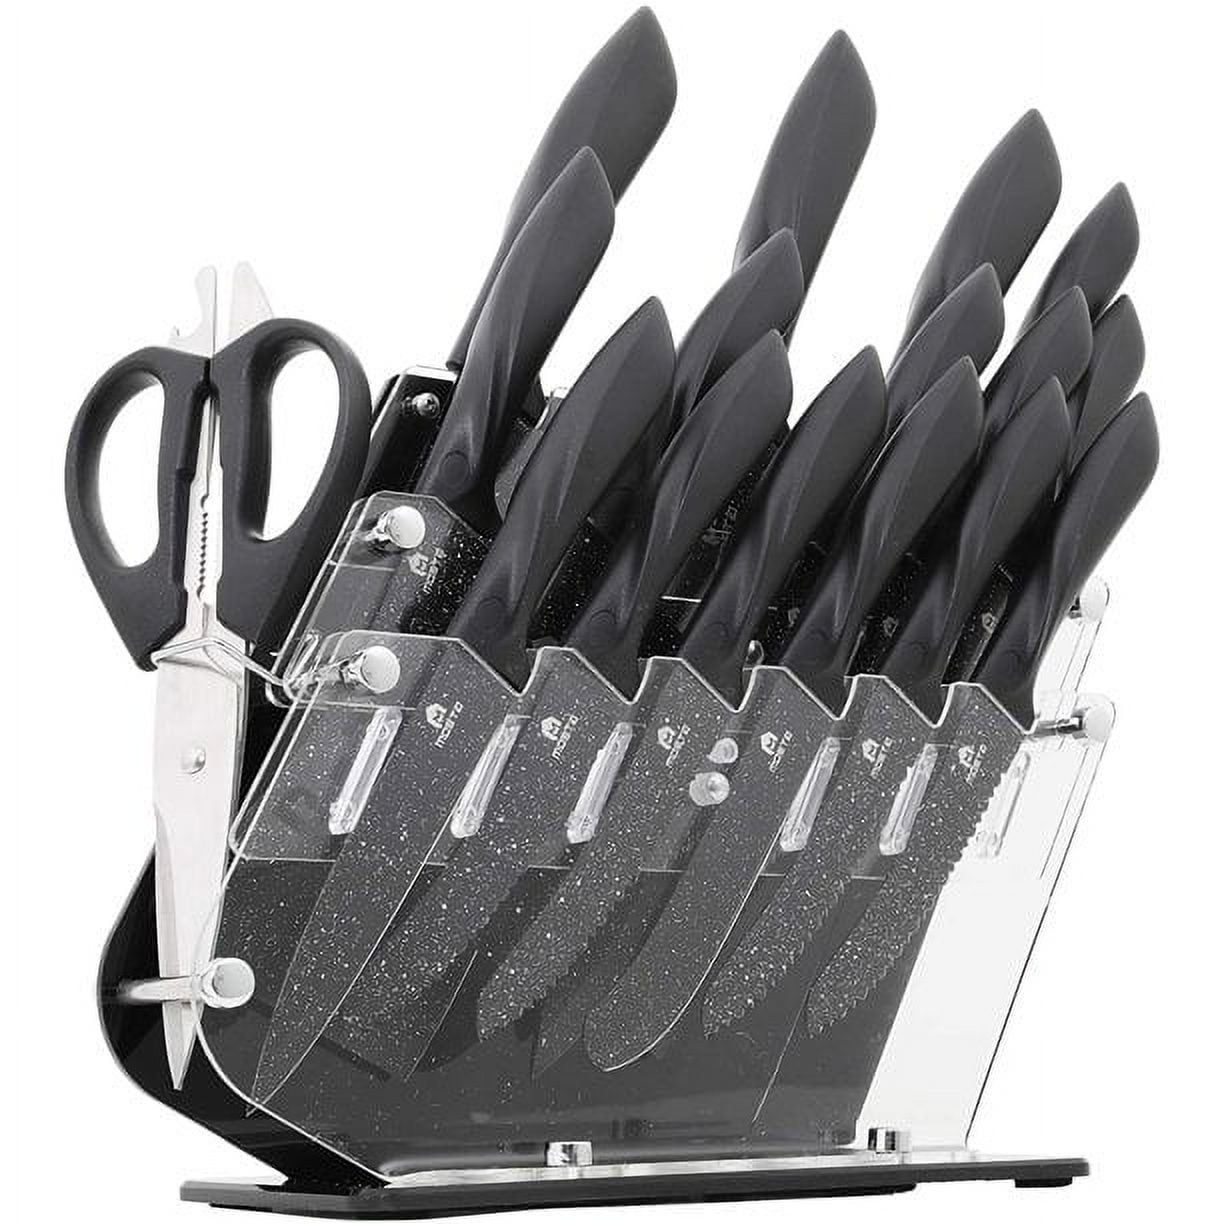 BEAFUORCT Block Knife Sets Stainless Steel With Sharpening 15 piece Acrylic  Stand Steak Knives Set Professional Chef Knife and Scissors for Kitchen